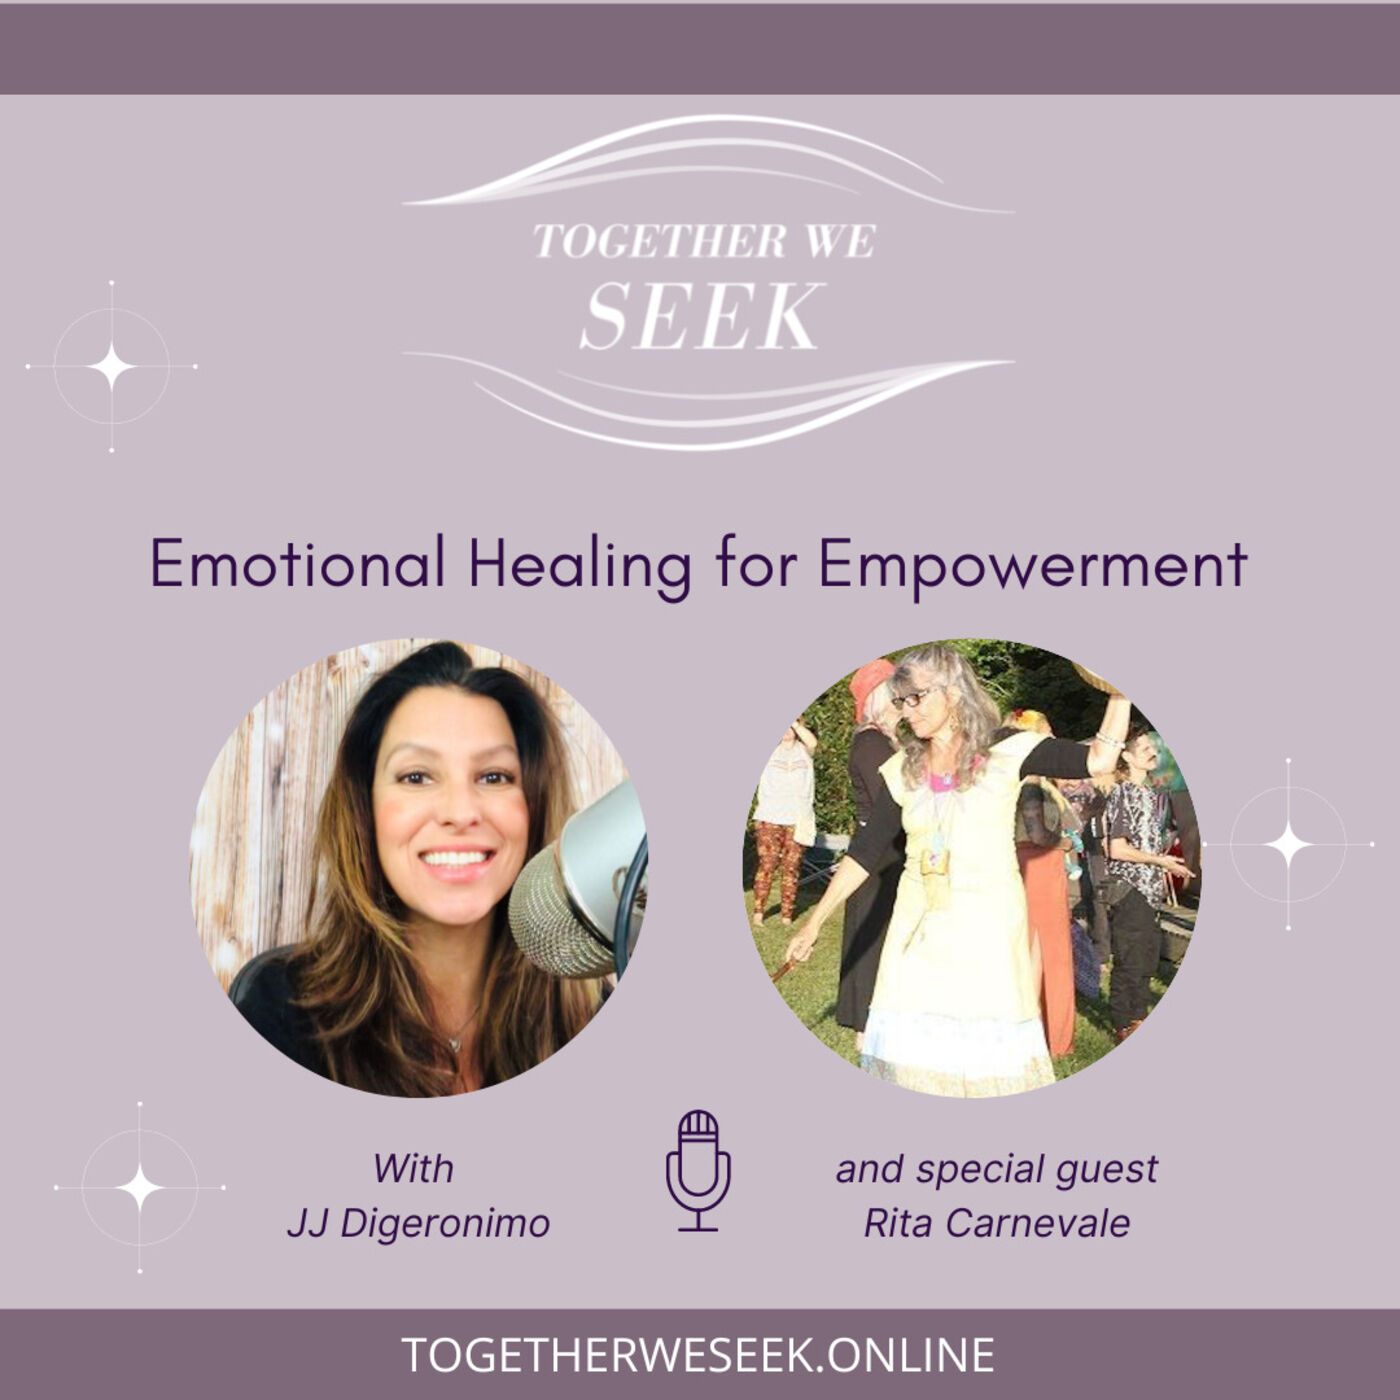 Emotional Healing for Empowerment with Rita Carnevale